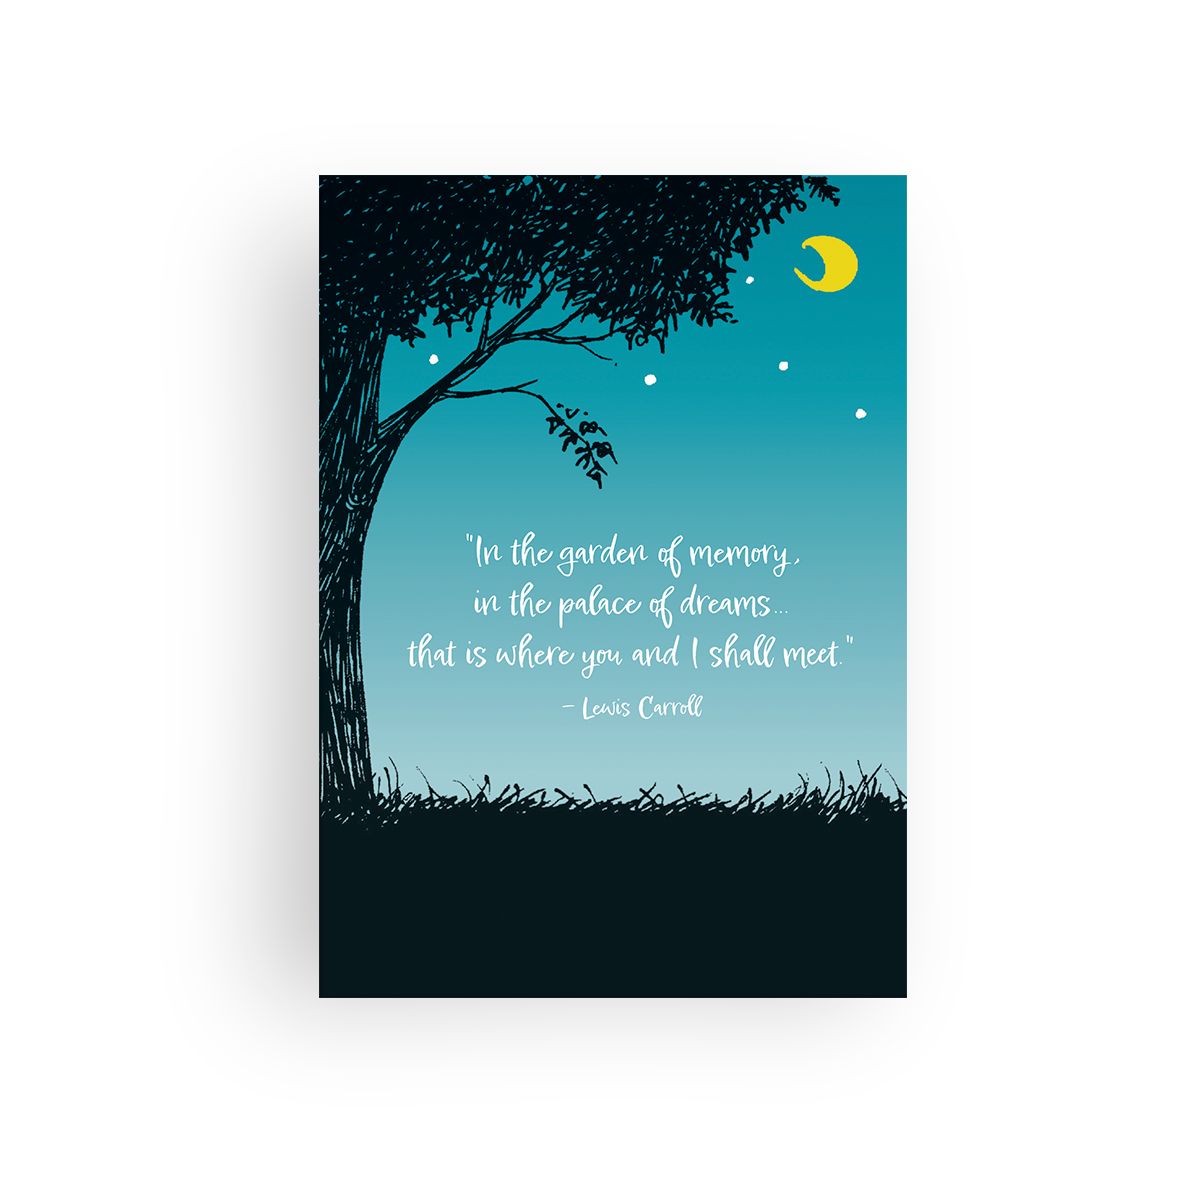 This lovely sympathy card features an image of a tree in the moonlight and includes the Lewis Carroll quote, 